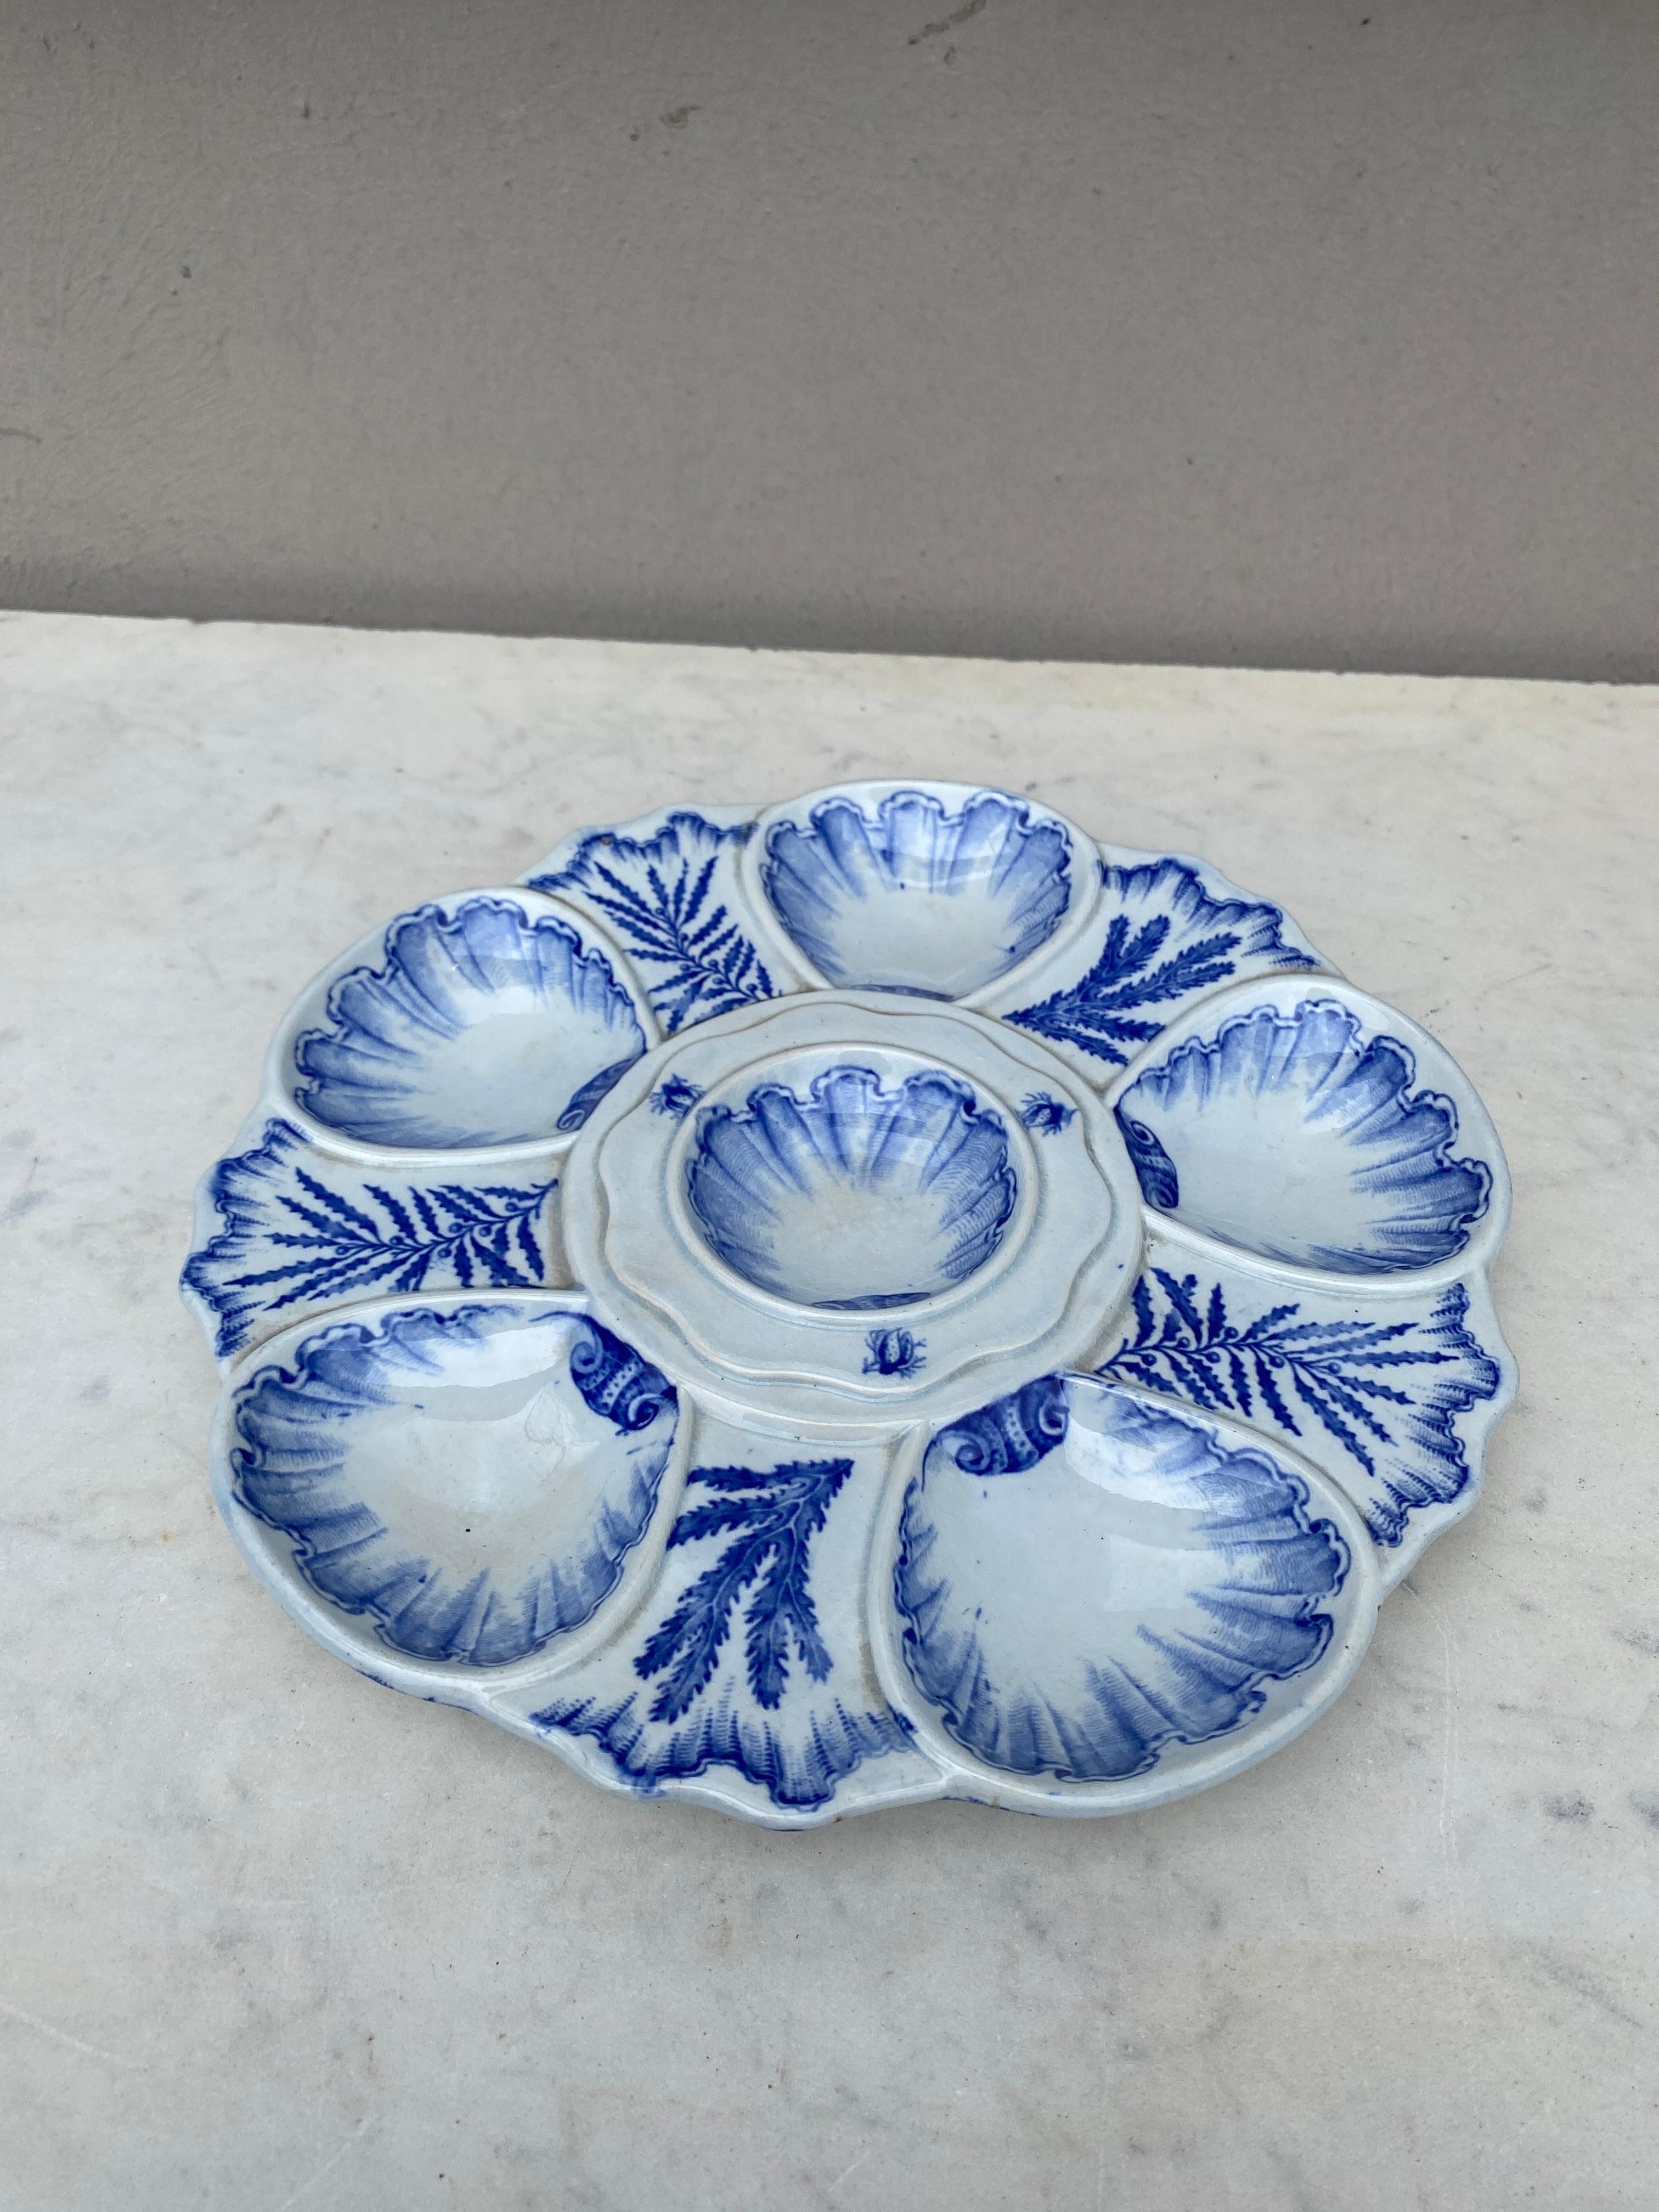 Elegant blue & white oyster plate signed Bordeaux Vieillard, circa 1890.
Six wells surrounded by blue seaweeds of different kinds.